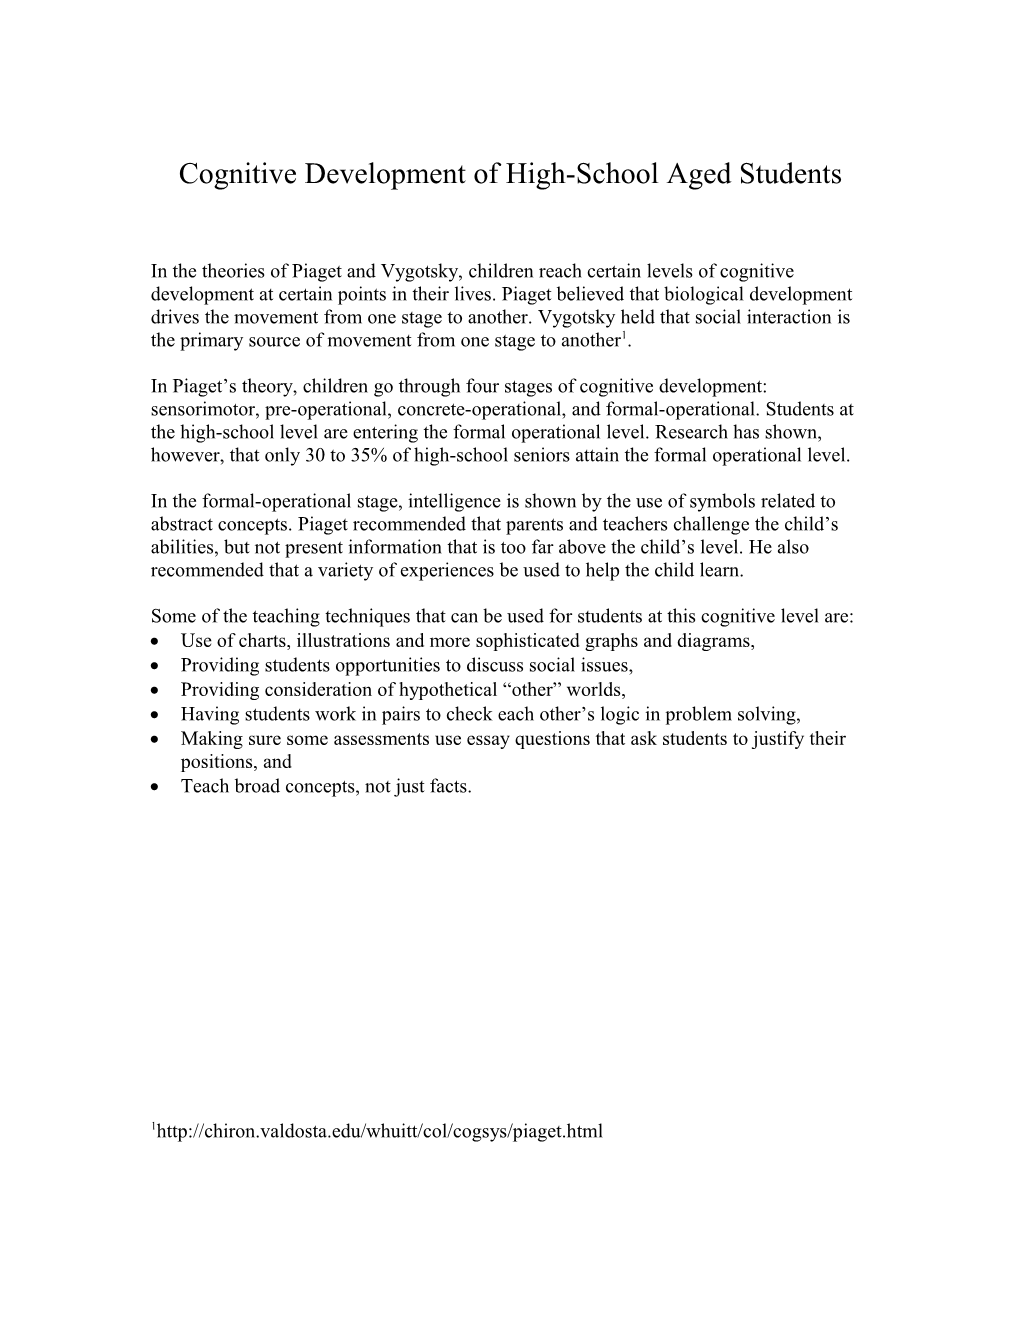 Cognitive Development of High-School Aged Students